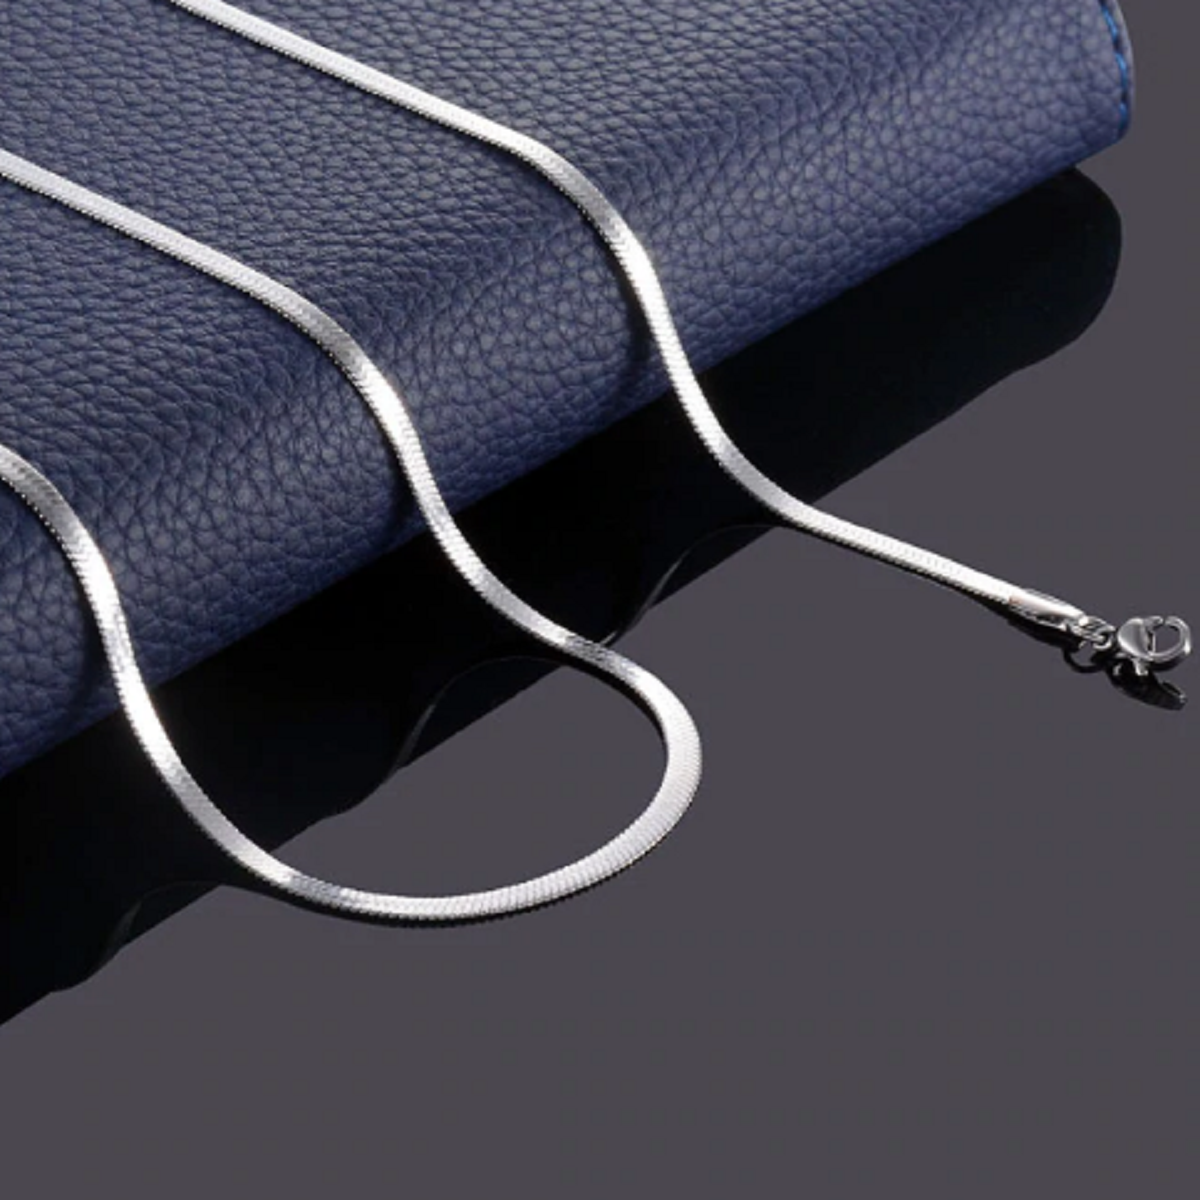 Minimalist Design Flat Chain Necklace - Stainless Steel, Metal Coated